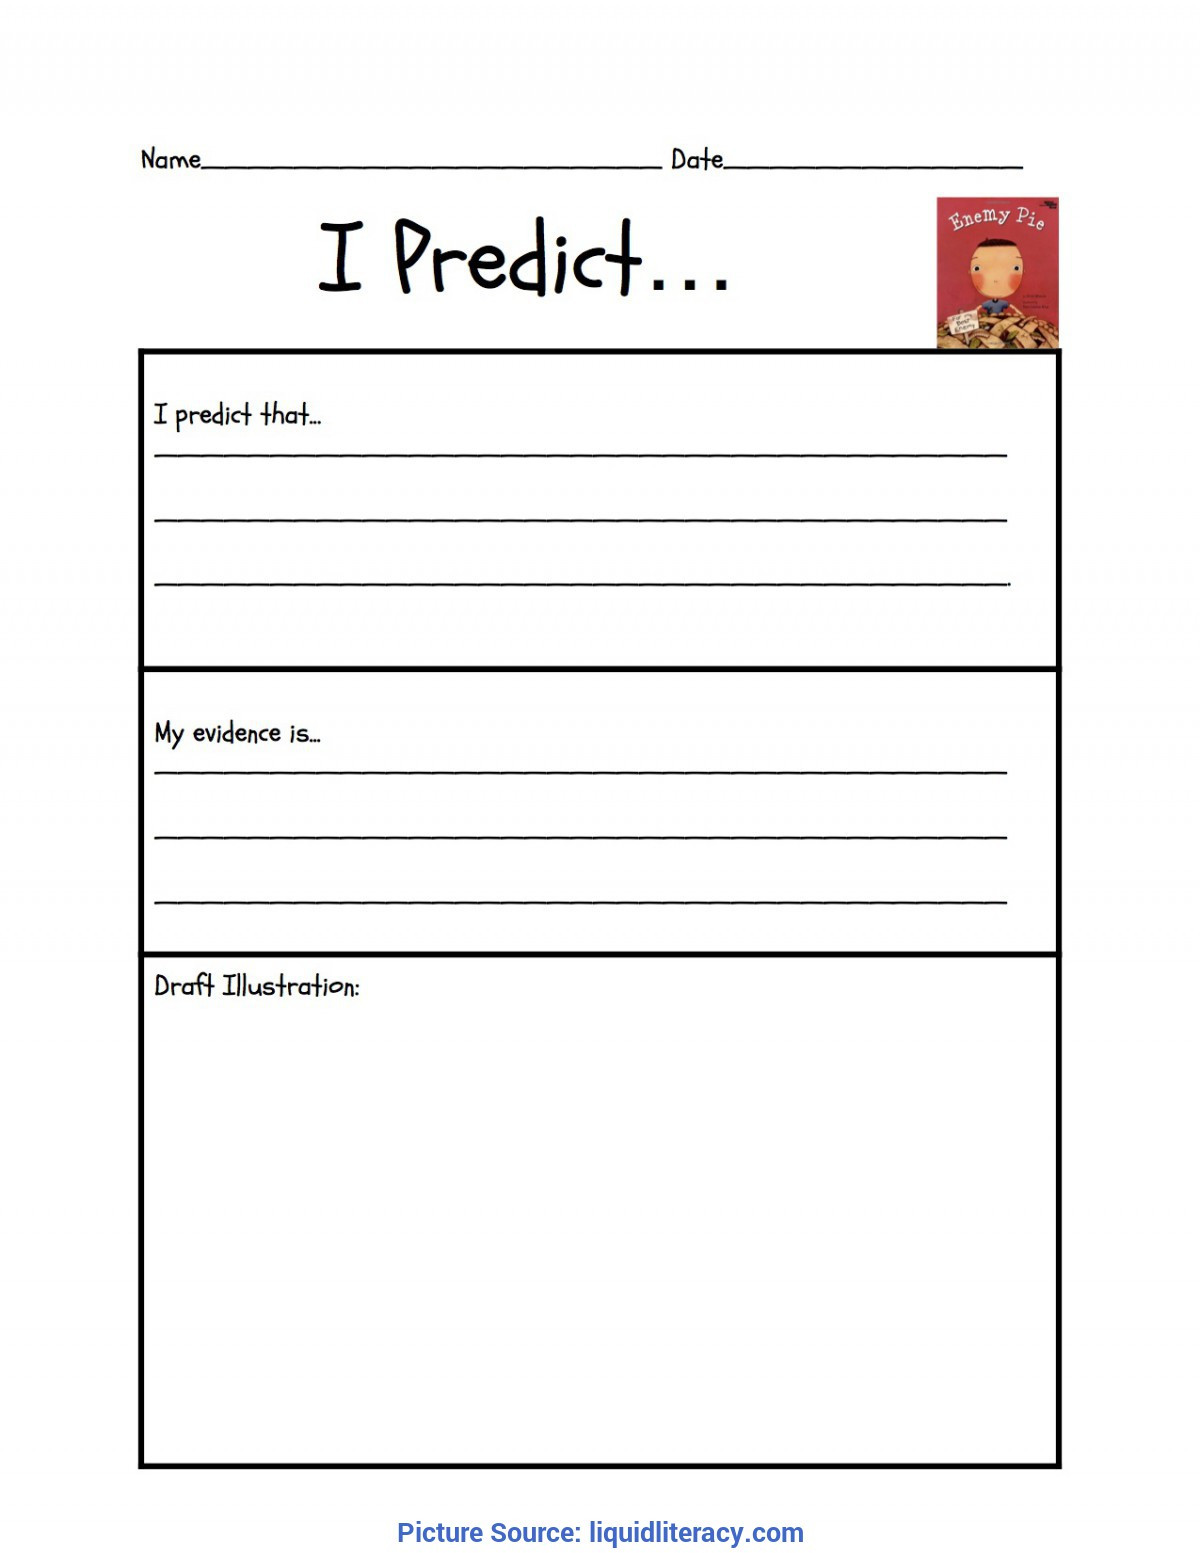 Making Predictions Worksheets 2nd Grade Workshop Classroom Making Inferences Mini Lessons